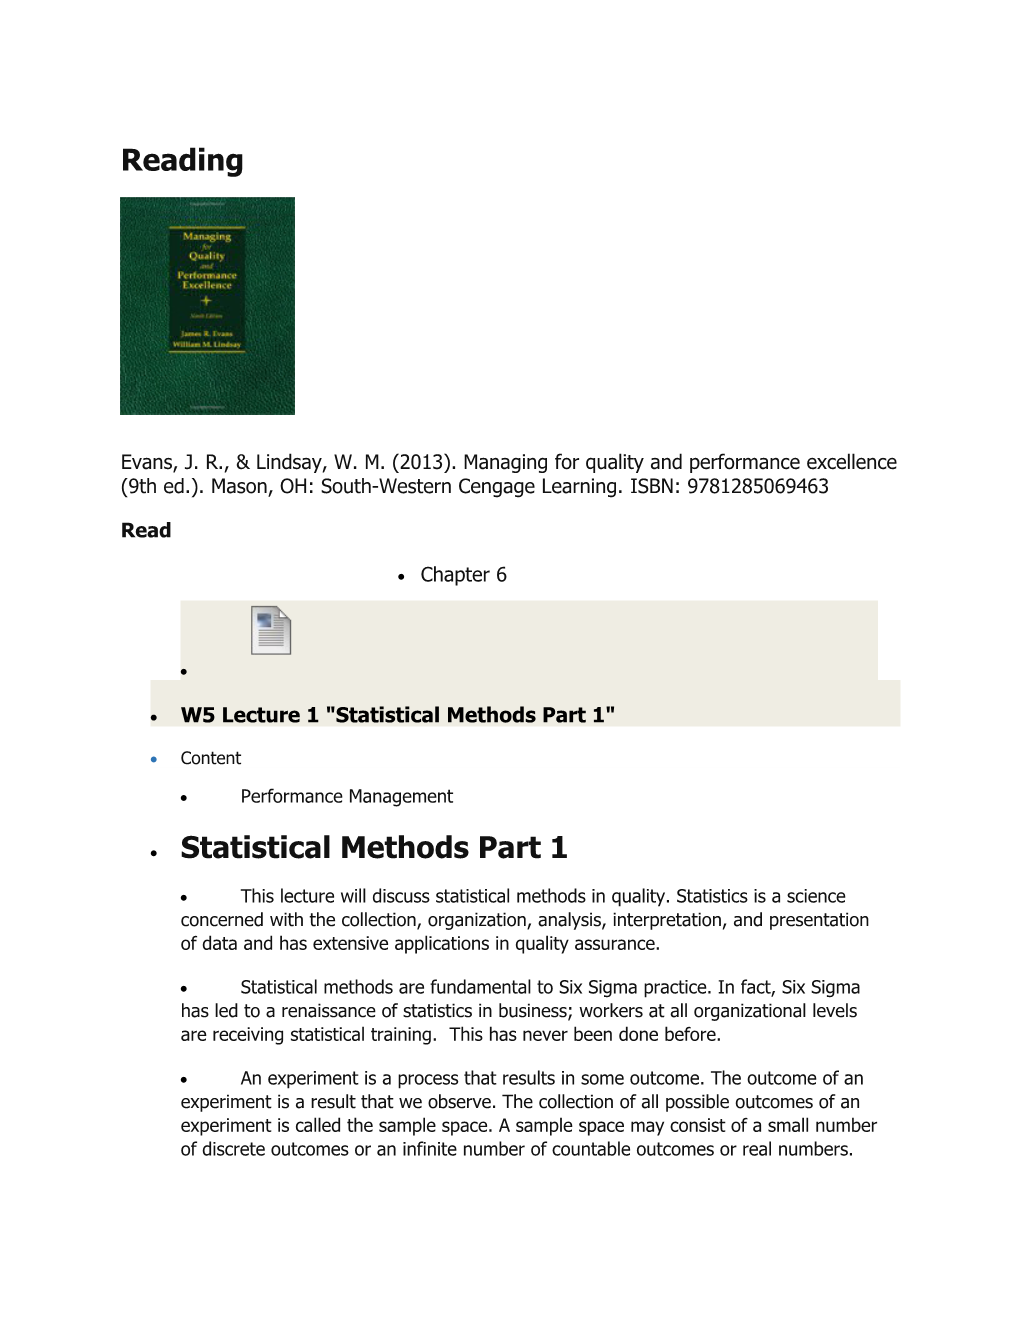 W5 Lecture 1 Statistical Methods Part 1